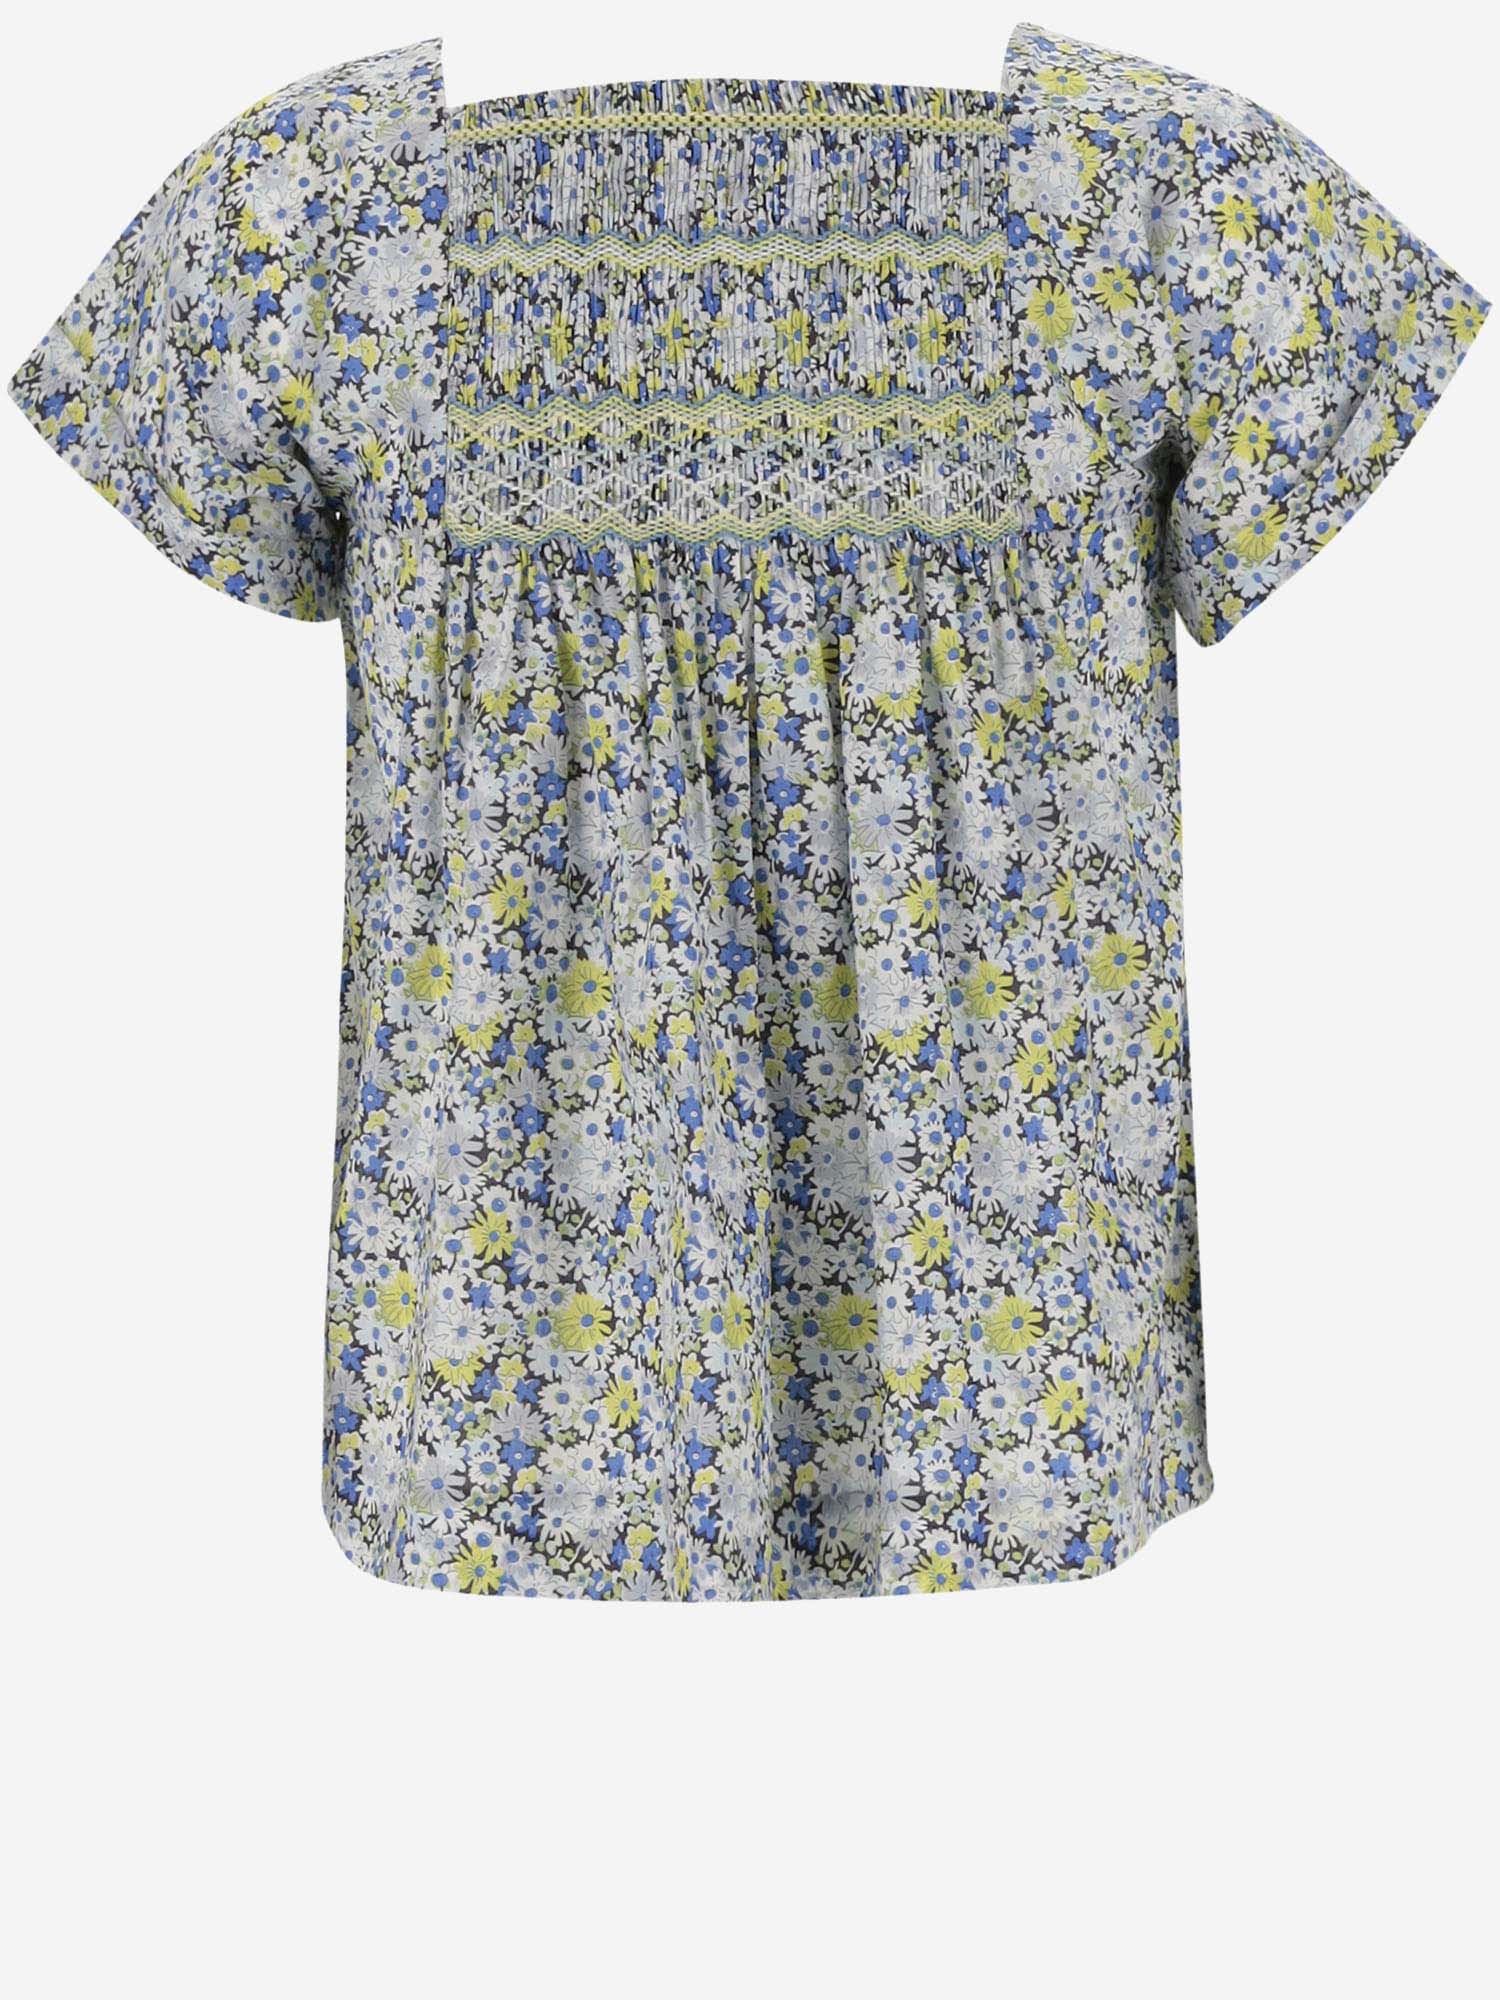 Bonpoint Kids' Cotton Blouse With Floral Pattern In Multi